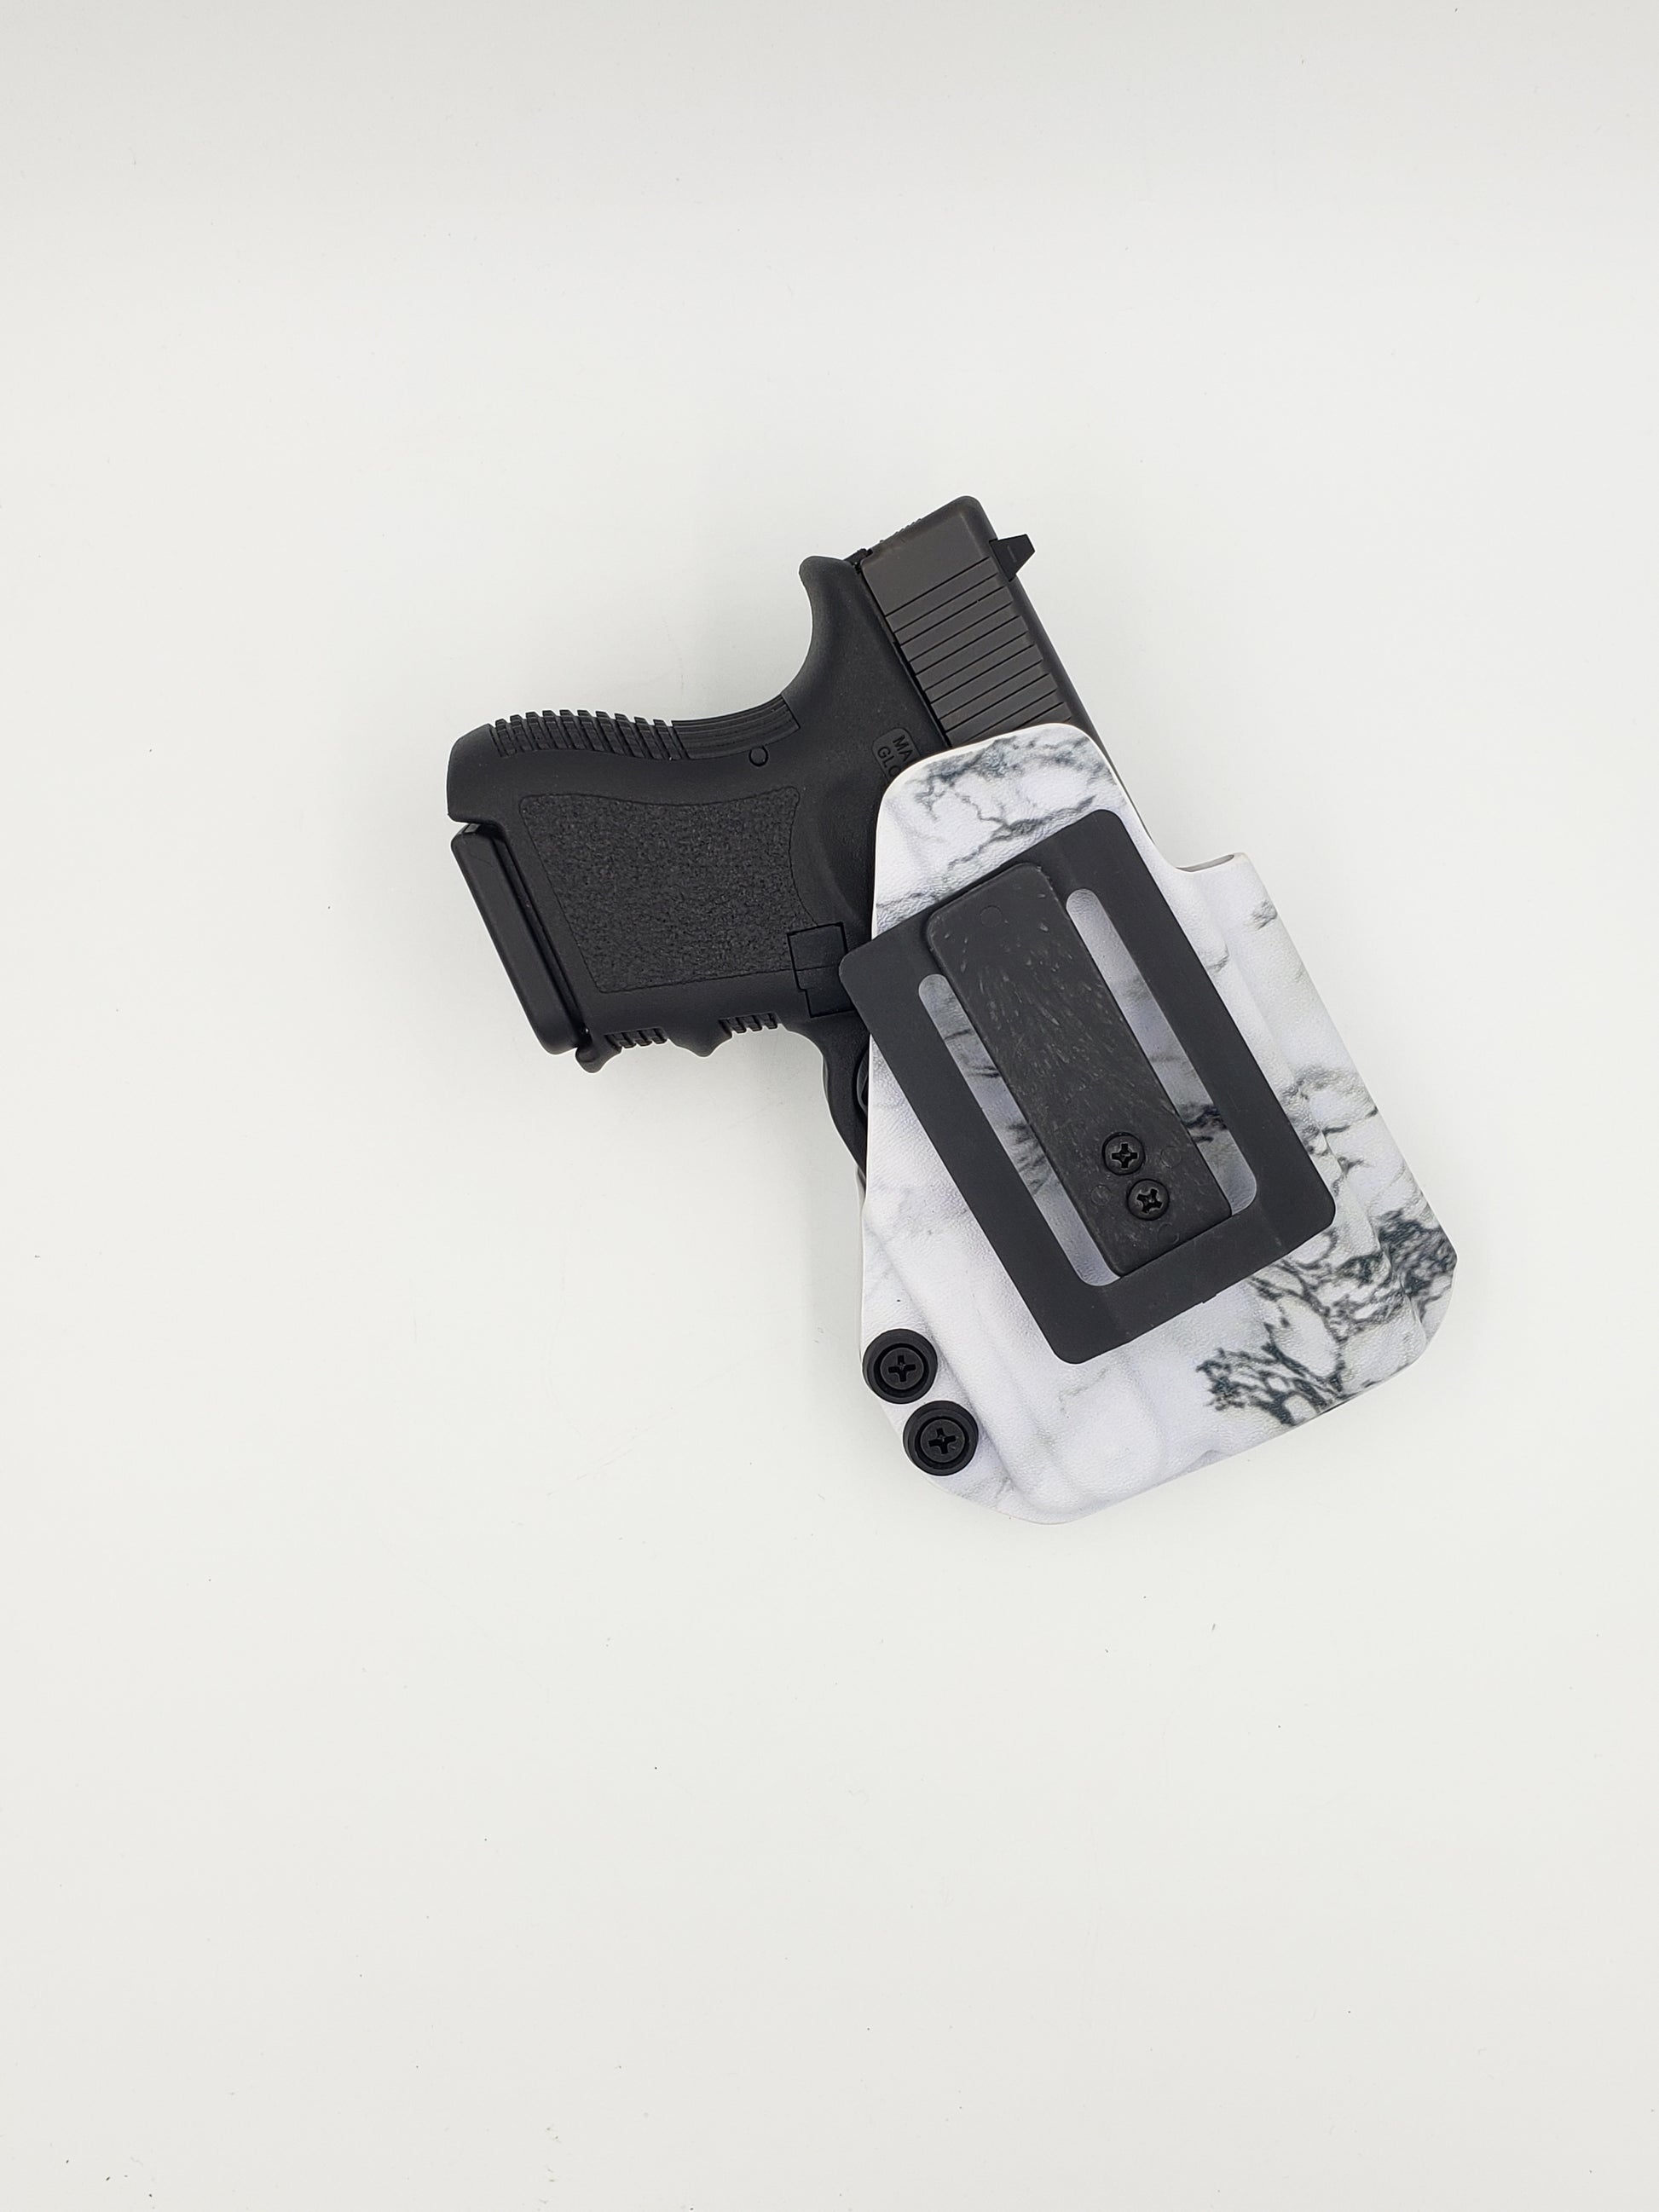 White Marble IWB Kydex Holster - Glock 26/27 W/TLR-6 Southern Bullets